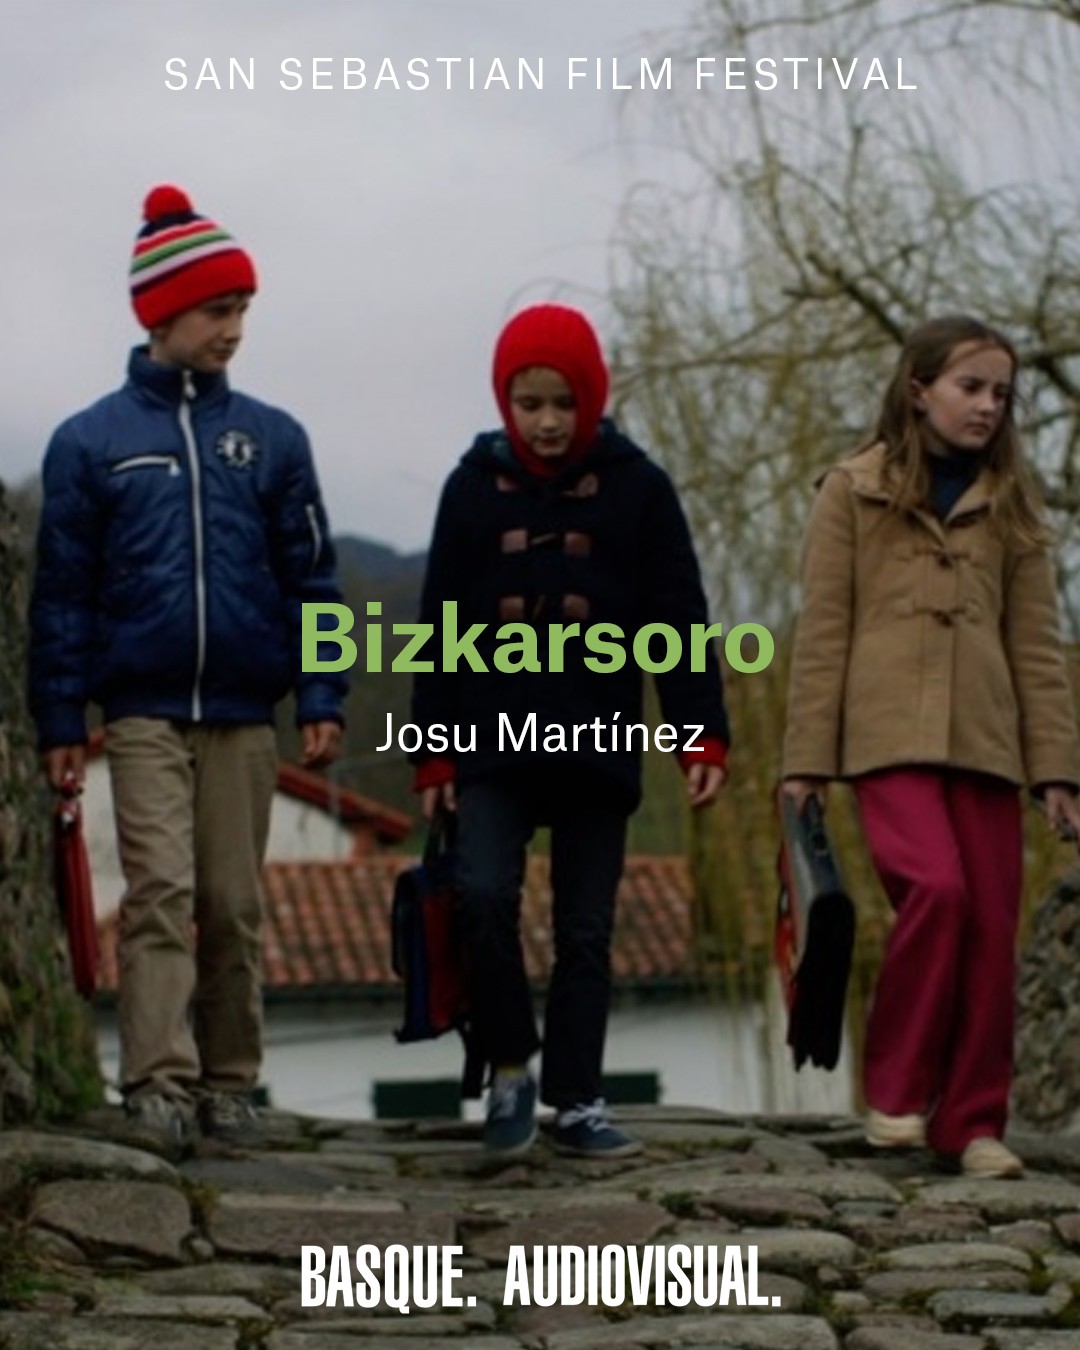 “‘Bizkarsoro’ is a grassroots project, created with the help of more than 200 residents of Baigorri